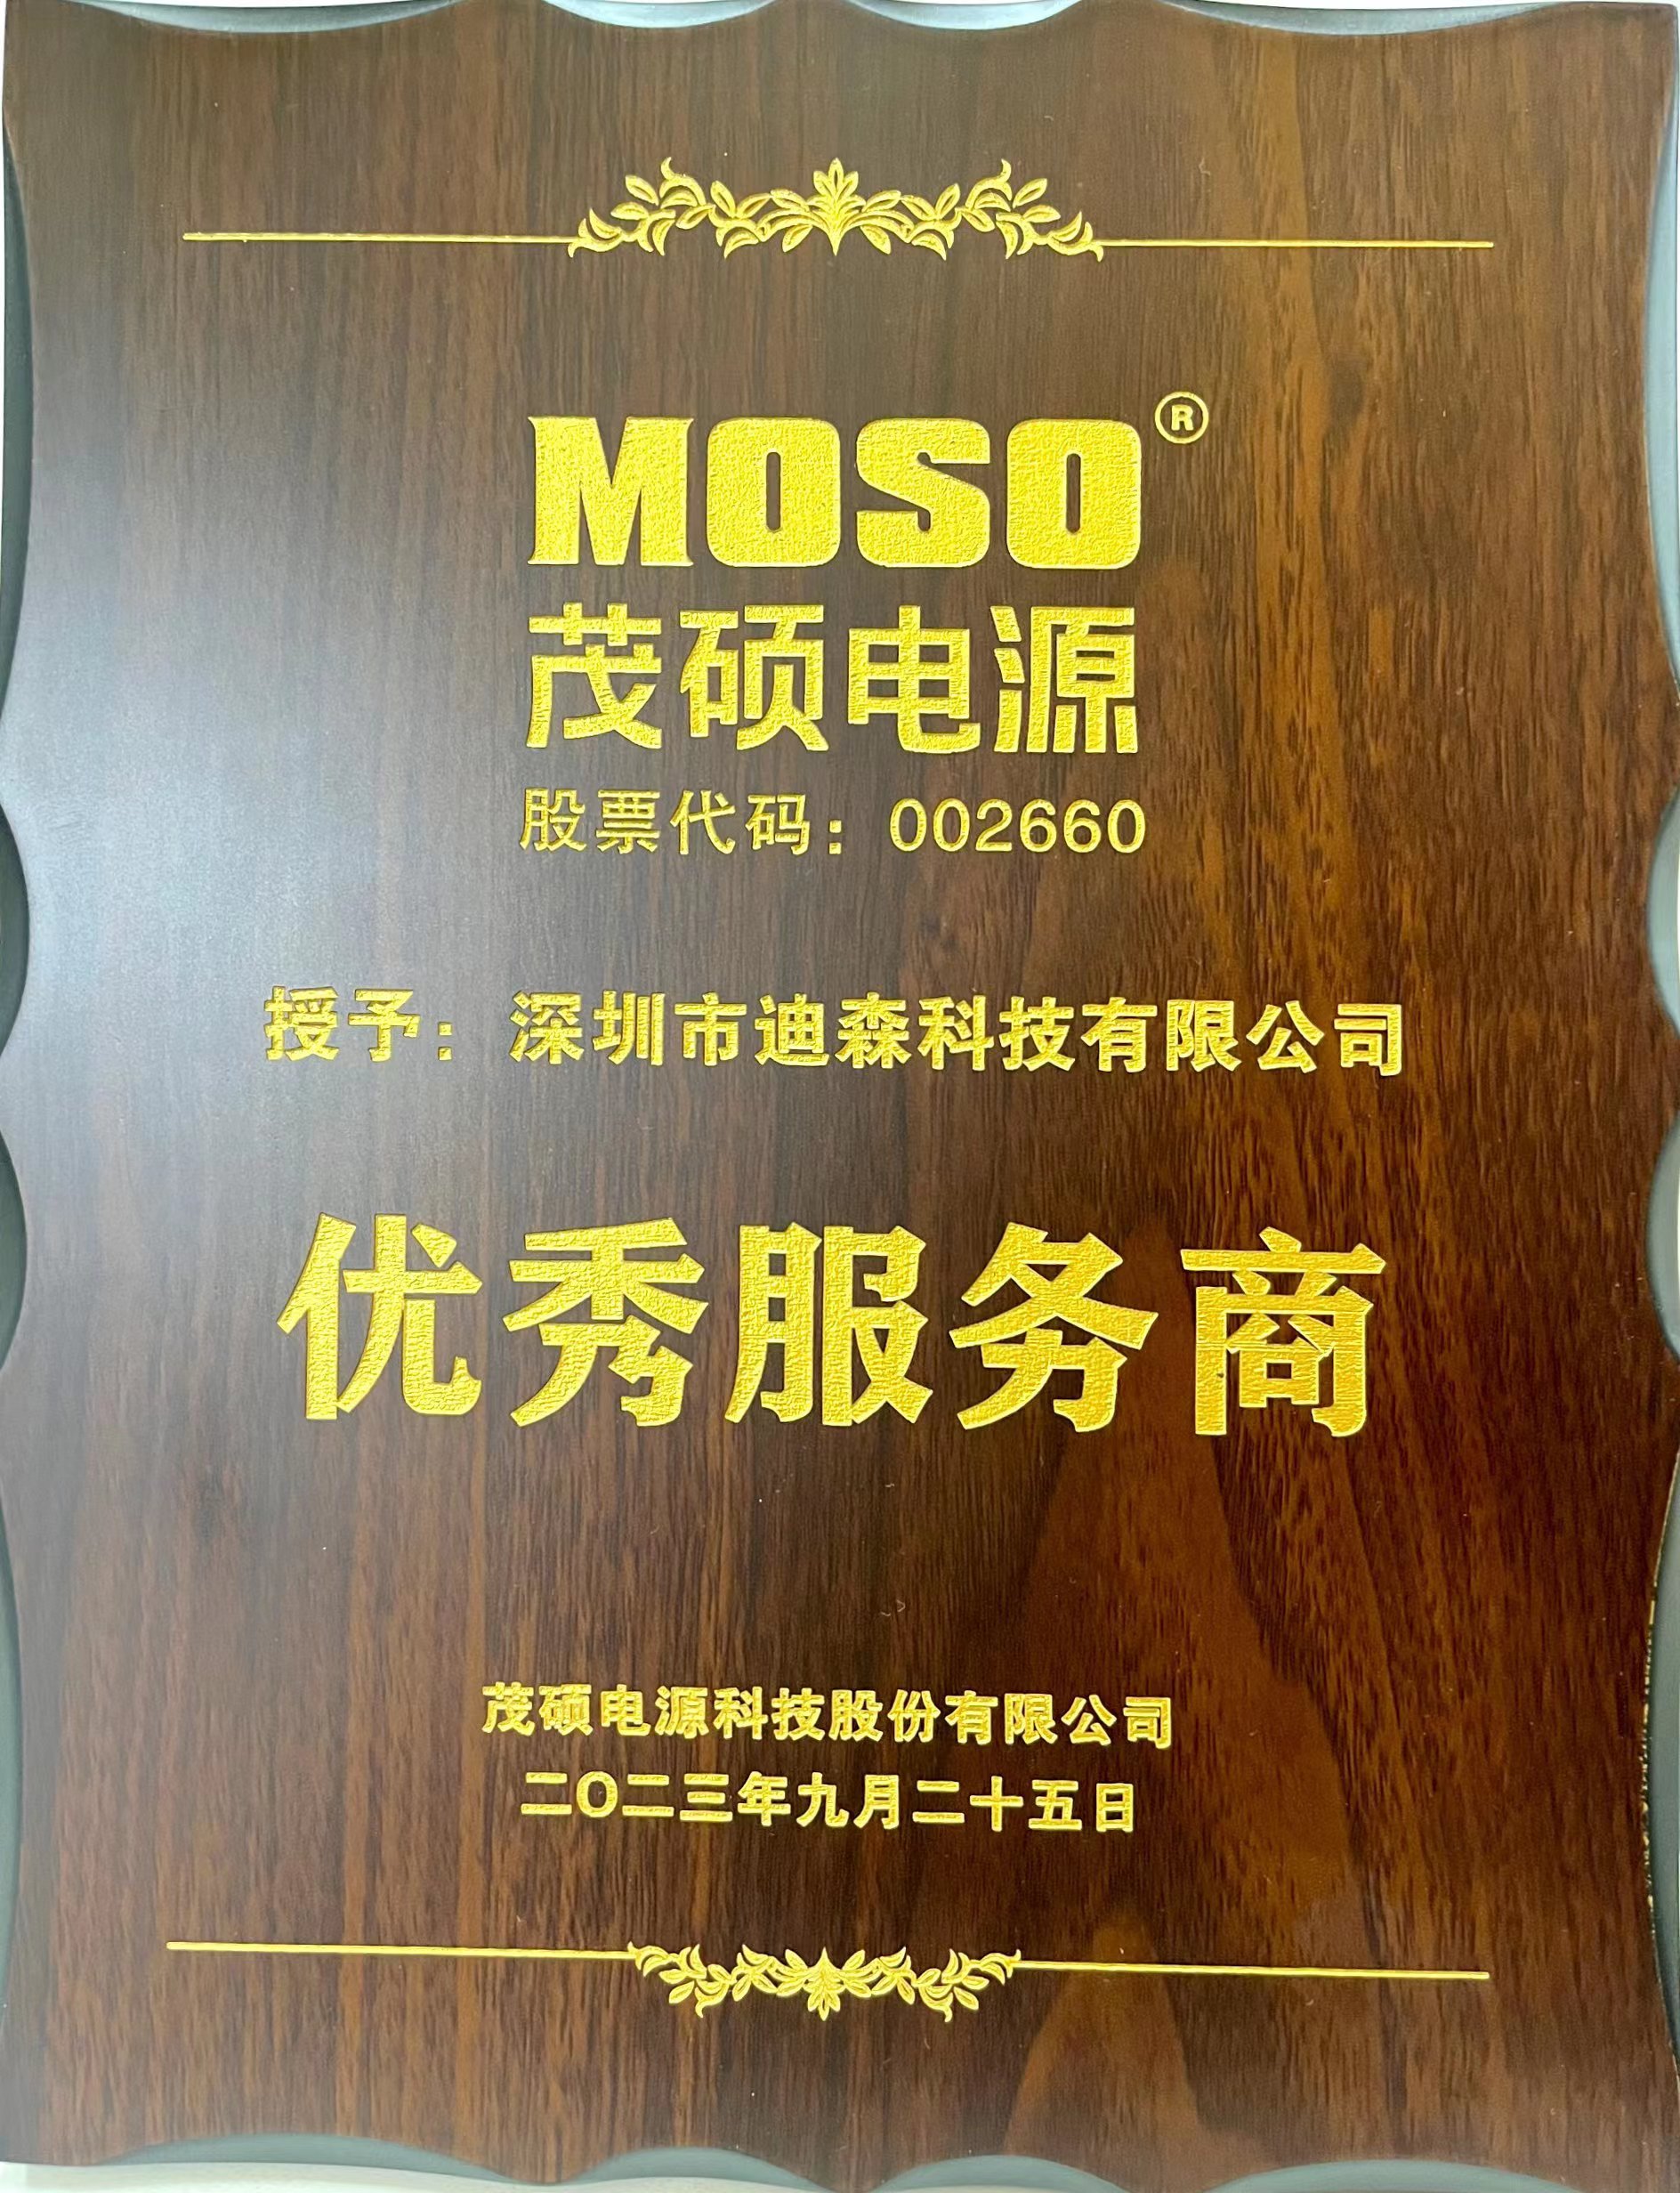 MOSO Power awarded Decision as 